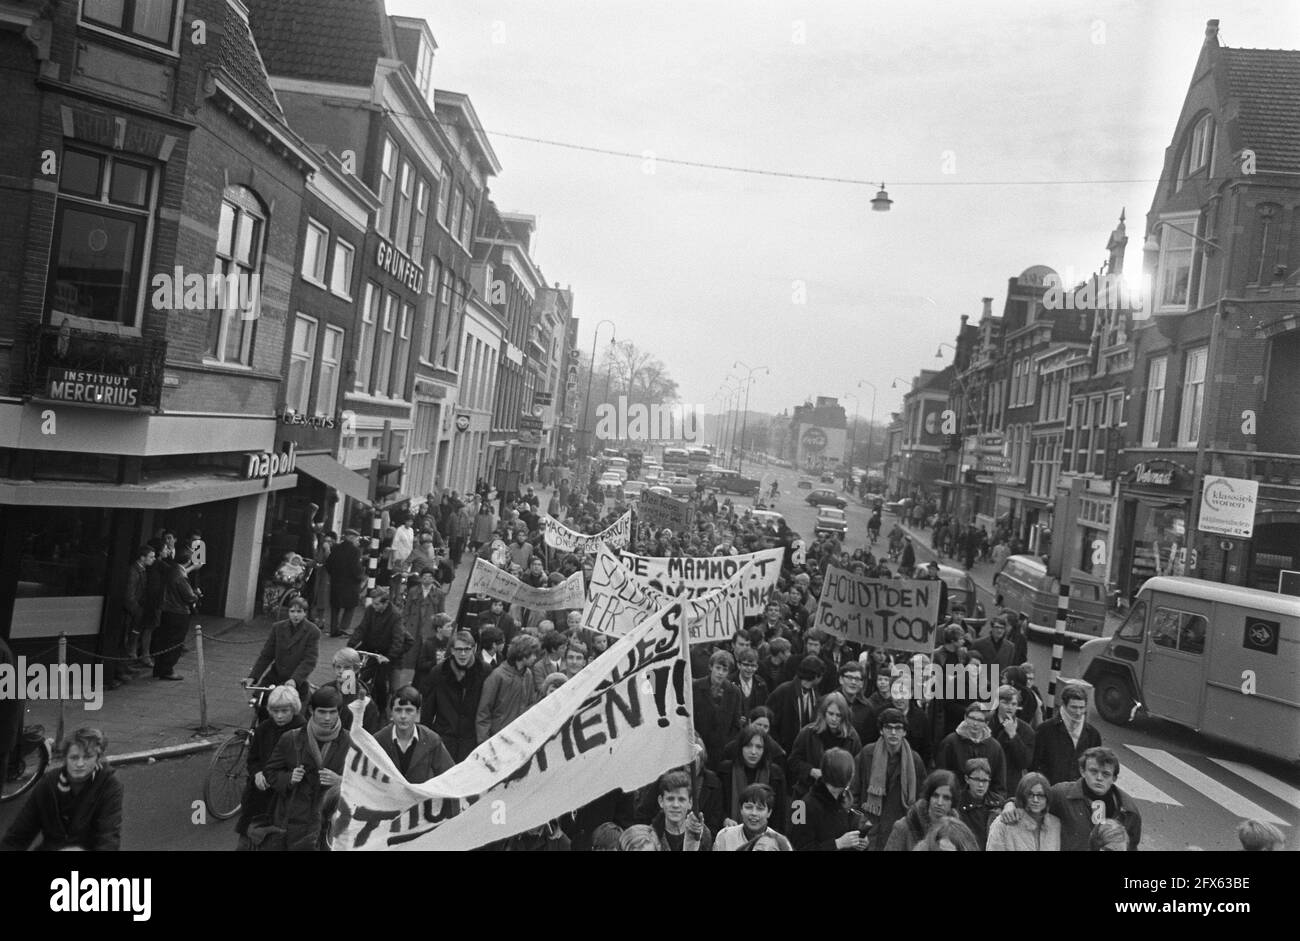 Haarlem high school students hold demonstration against 225 million defense budget increase demonstrators with banners, November 27, 1968, SCHOLIERES, SPANDOEKEN, demonstrators, demonstrations, The Netherlands, 20th century press agency photo, news to remember, documentary, historic photography 1945-1990, visual stories, human history of the Twentieth Century, capturing moments in time Stock Photo